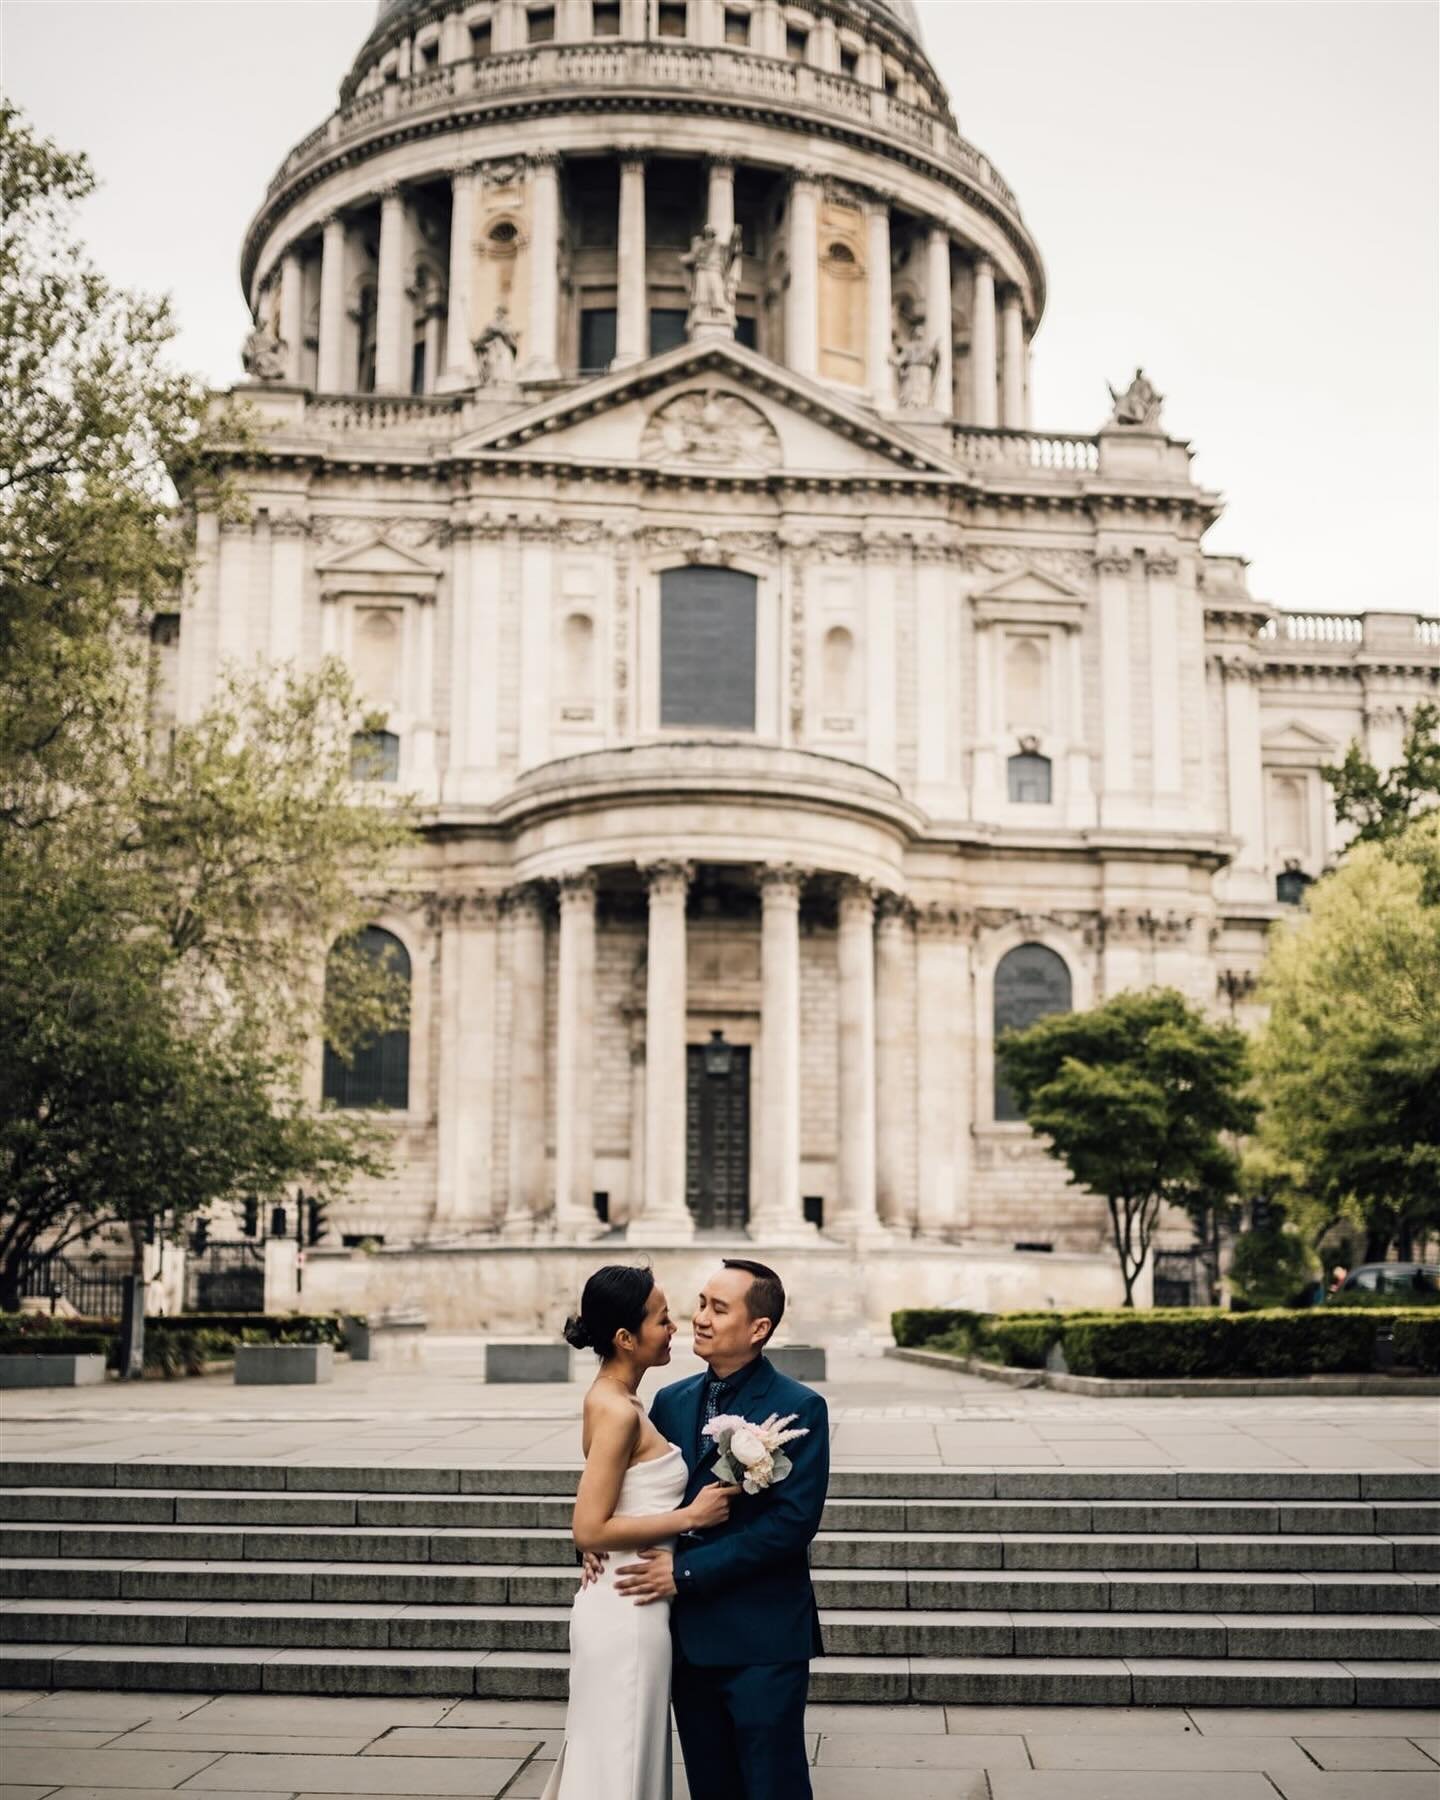 Engagement shoot in the city

#citylovers #londonengagement #coupleshootideas #stpaulscathedral #londonarchitecture